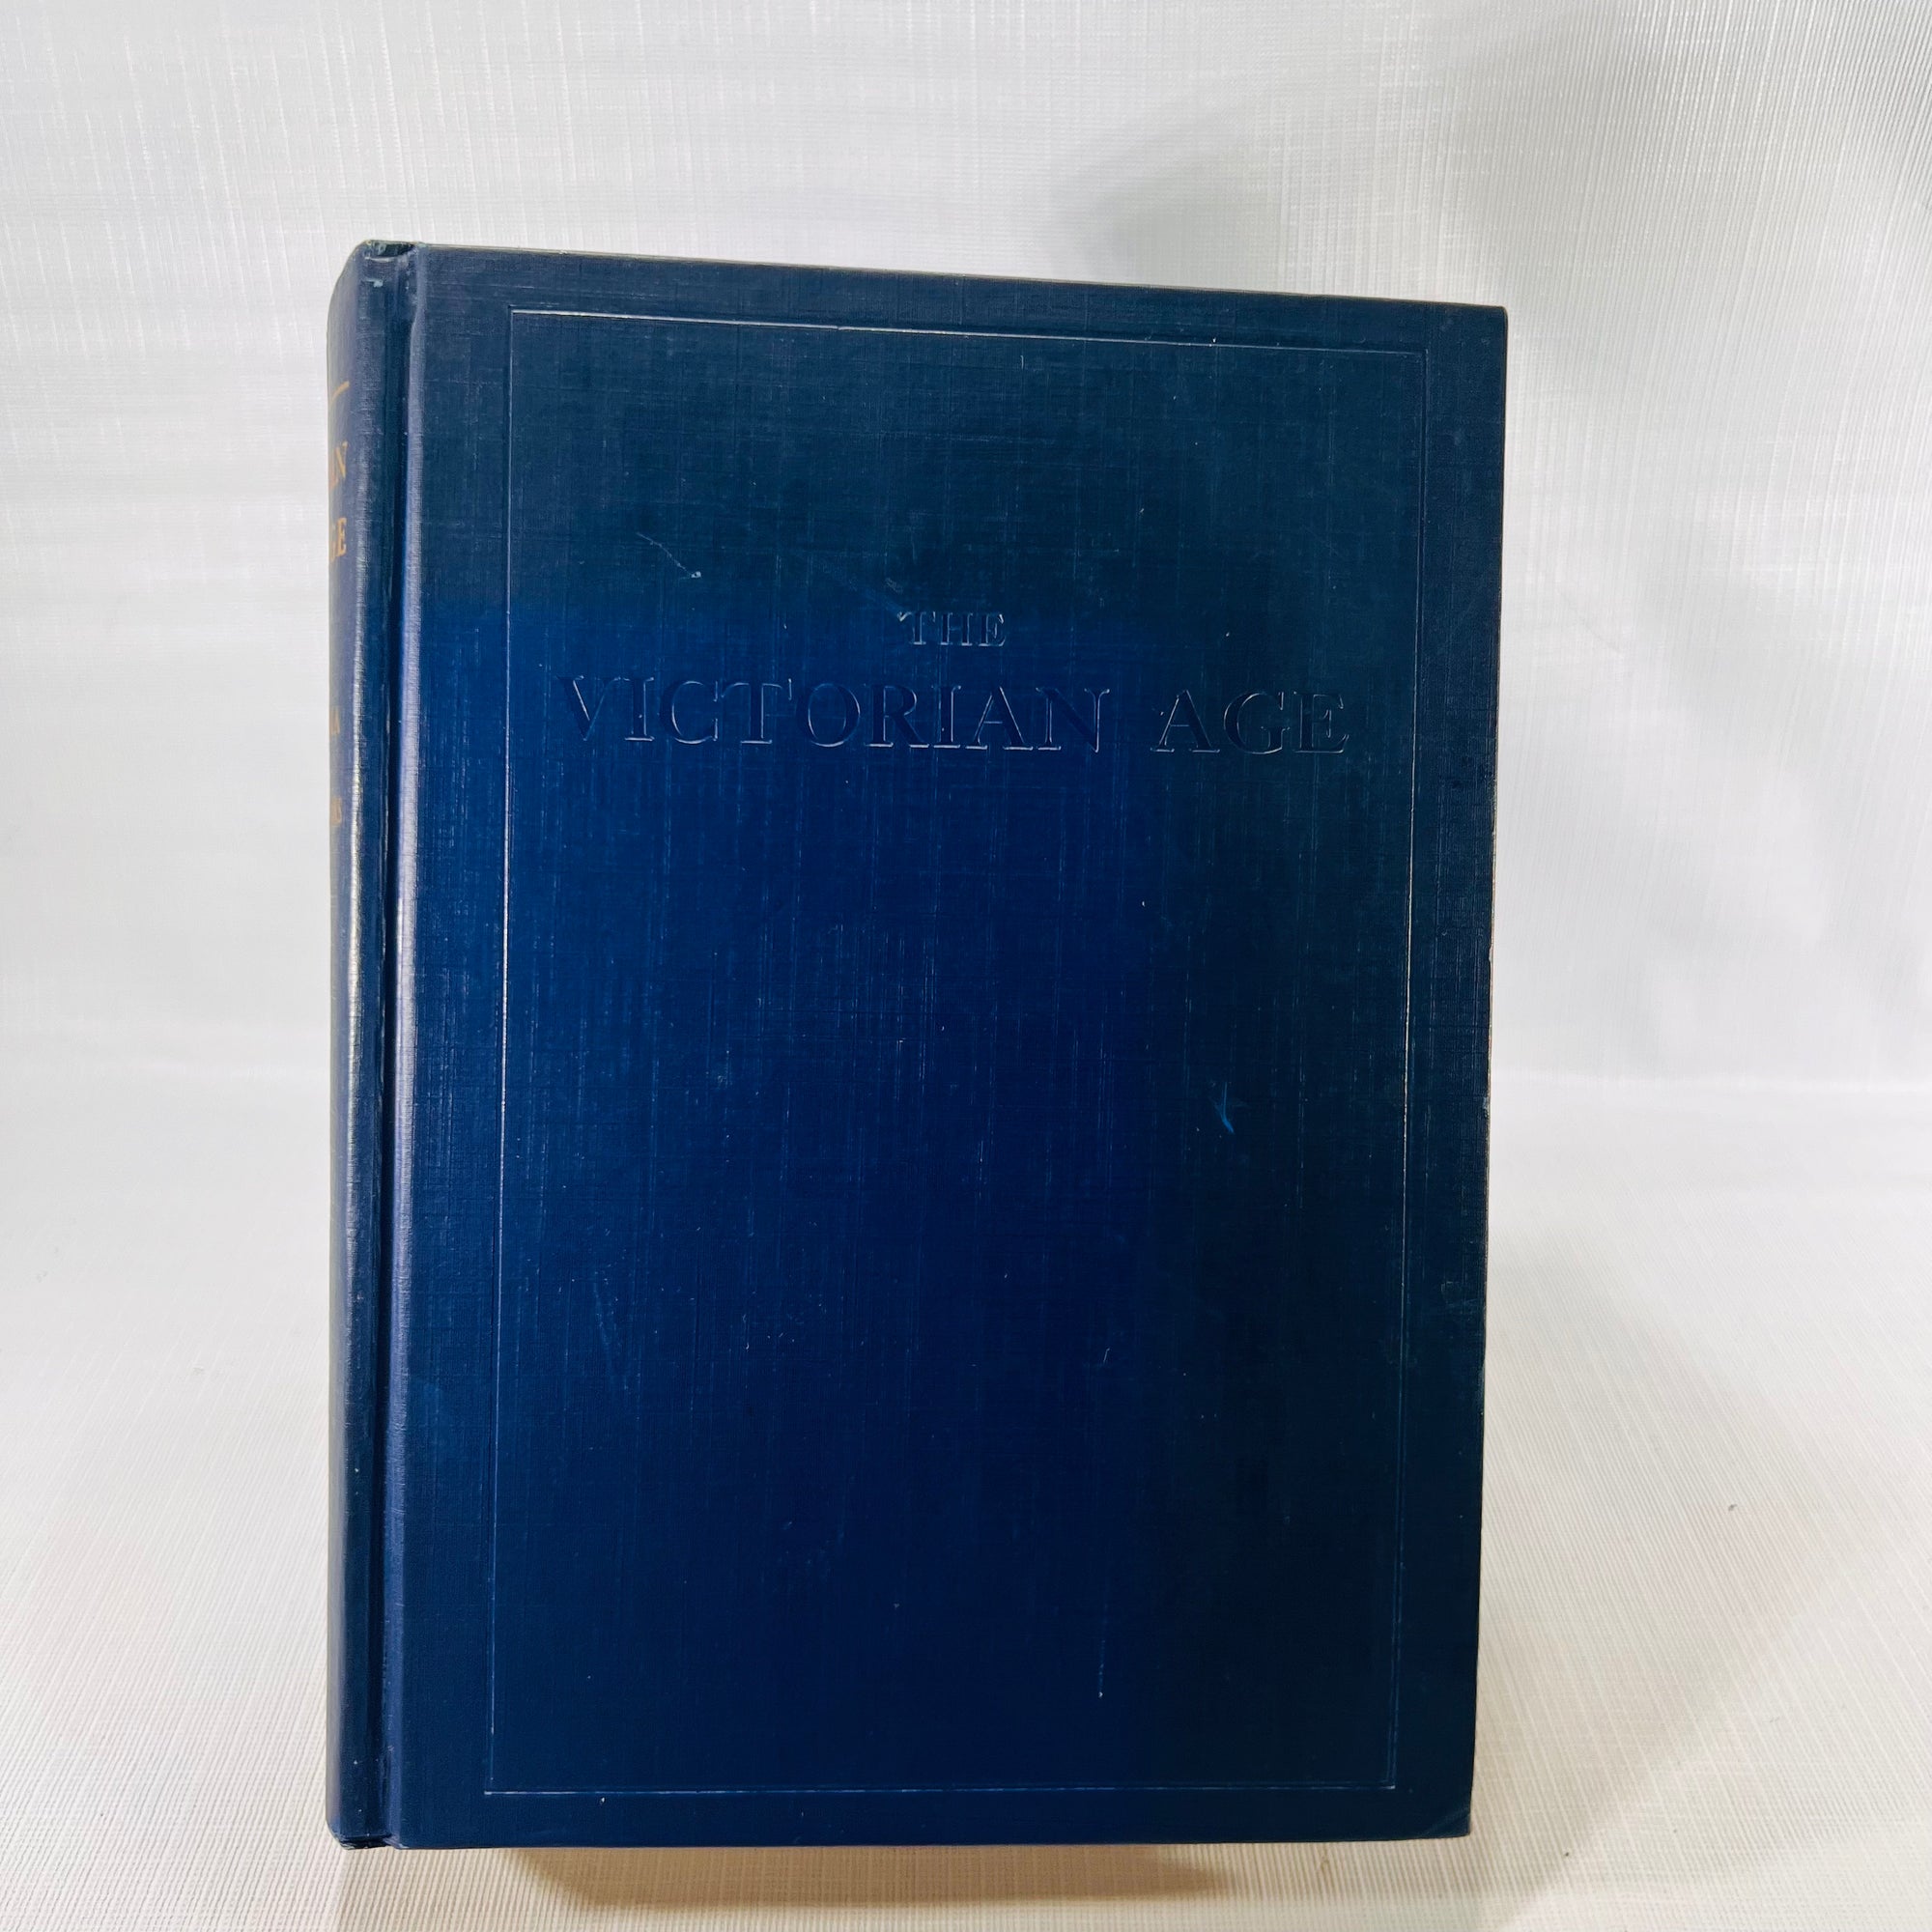 The Victorian Age Prose Poetry and Drama by John Wilson Bowyer Second Edition 1954 Prentice-Hall  Inc